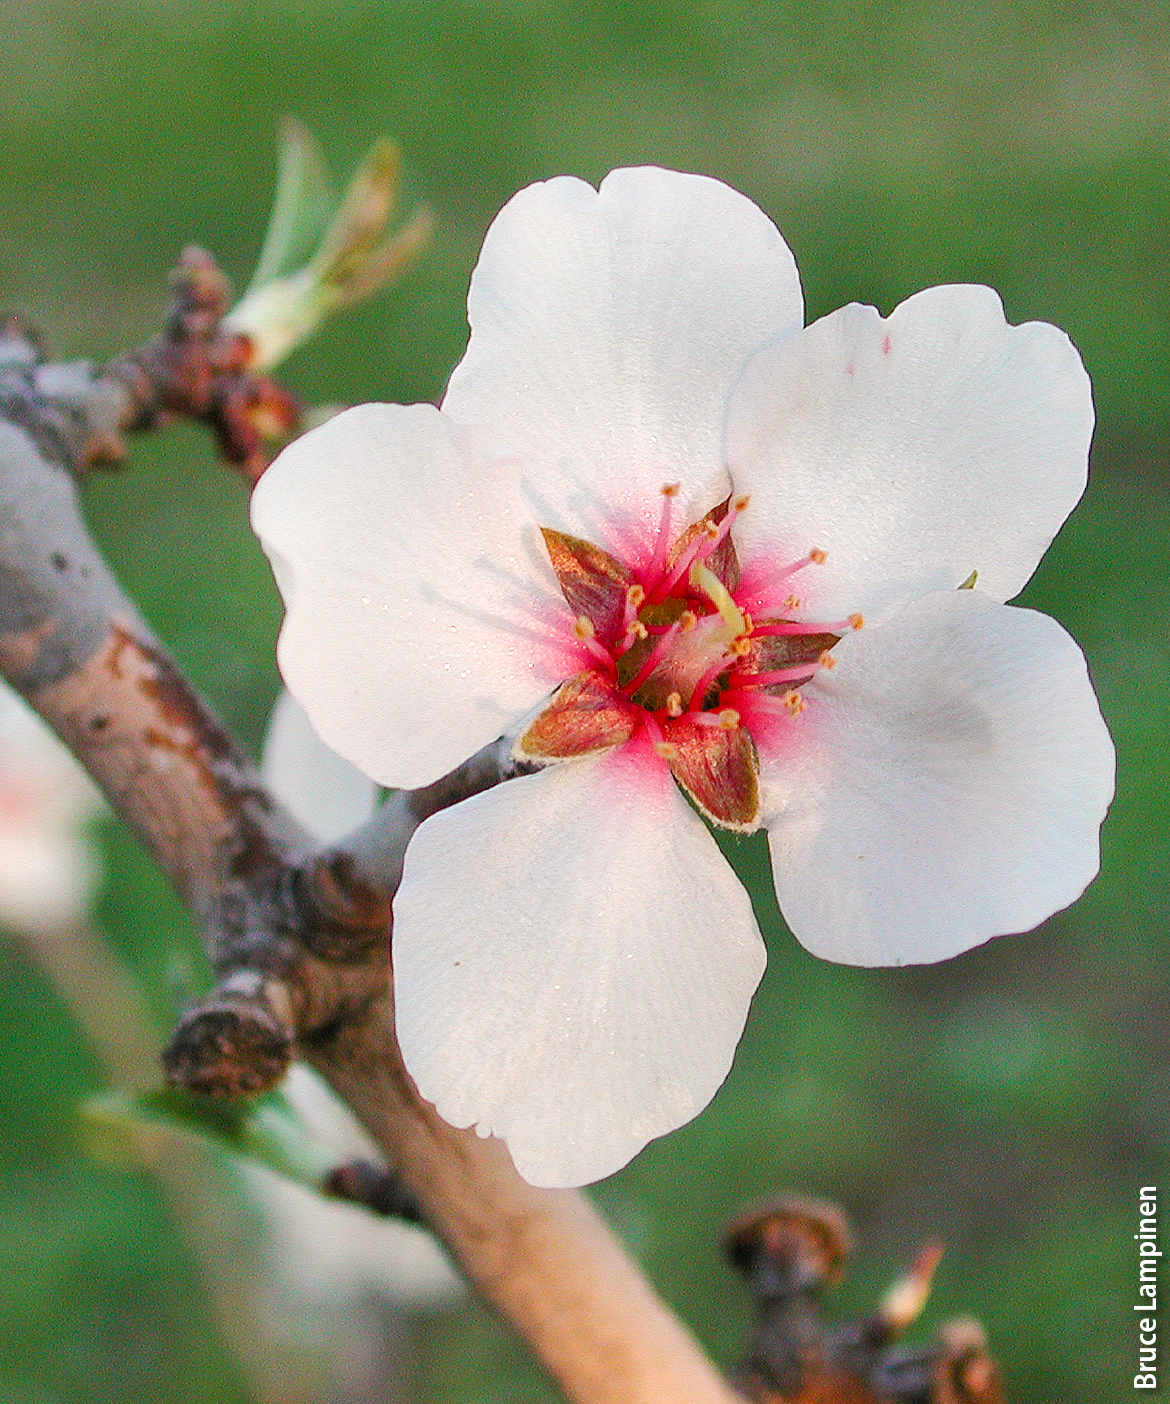 An almond spur with a flower in full bloom. The number of flowers that set fruit determines the final kernel yield per tree.